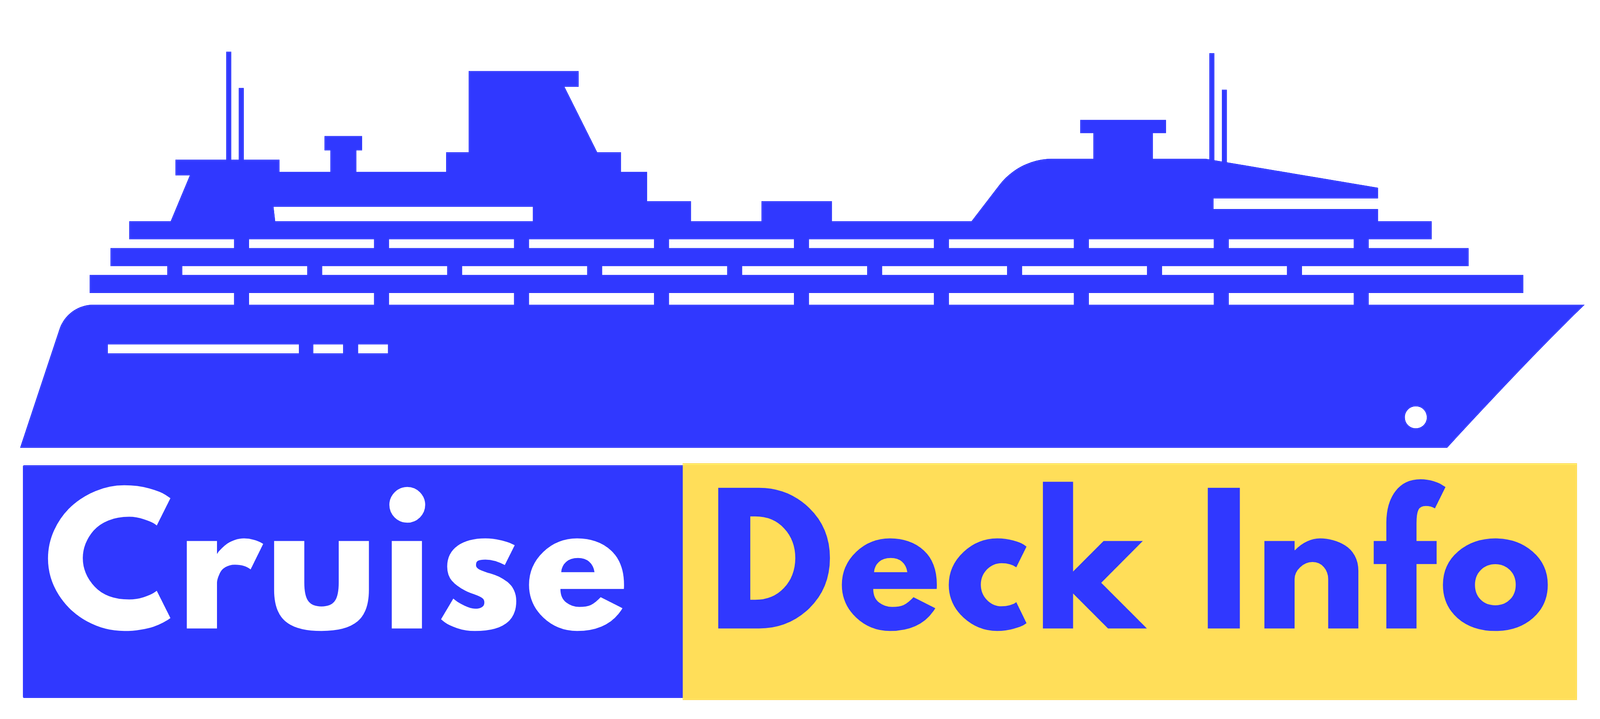 cruise deck meaning